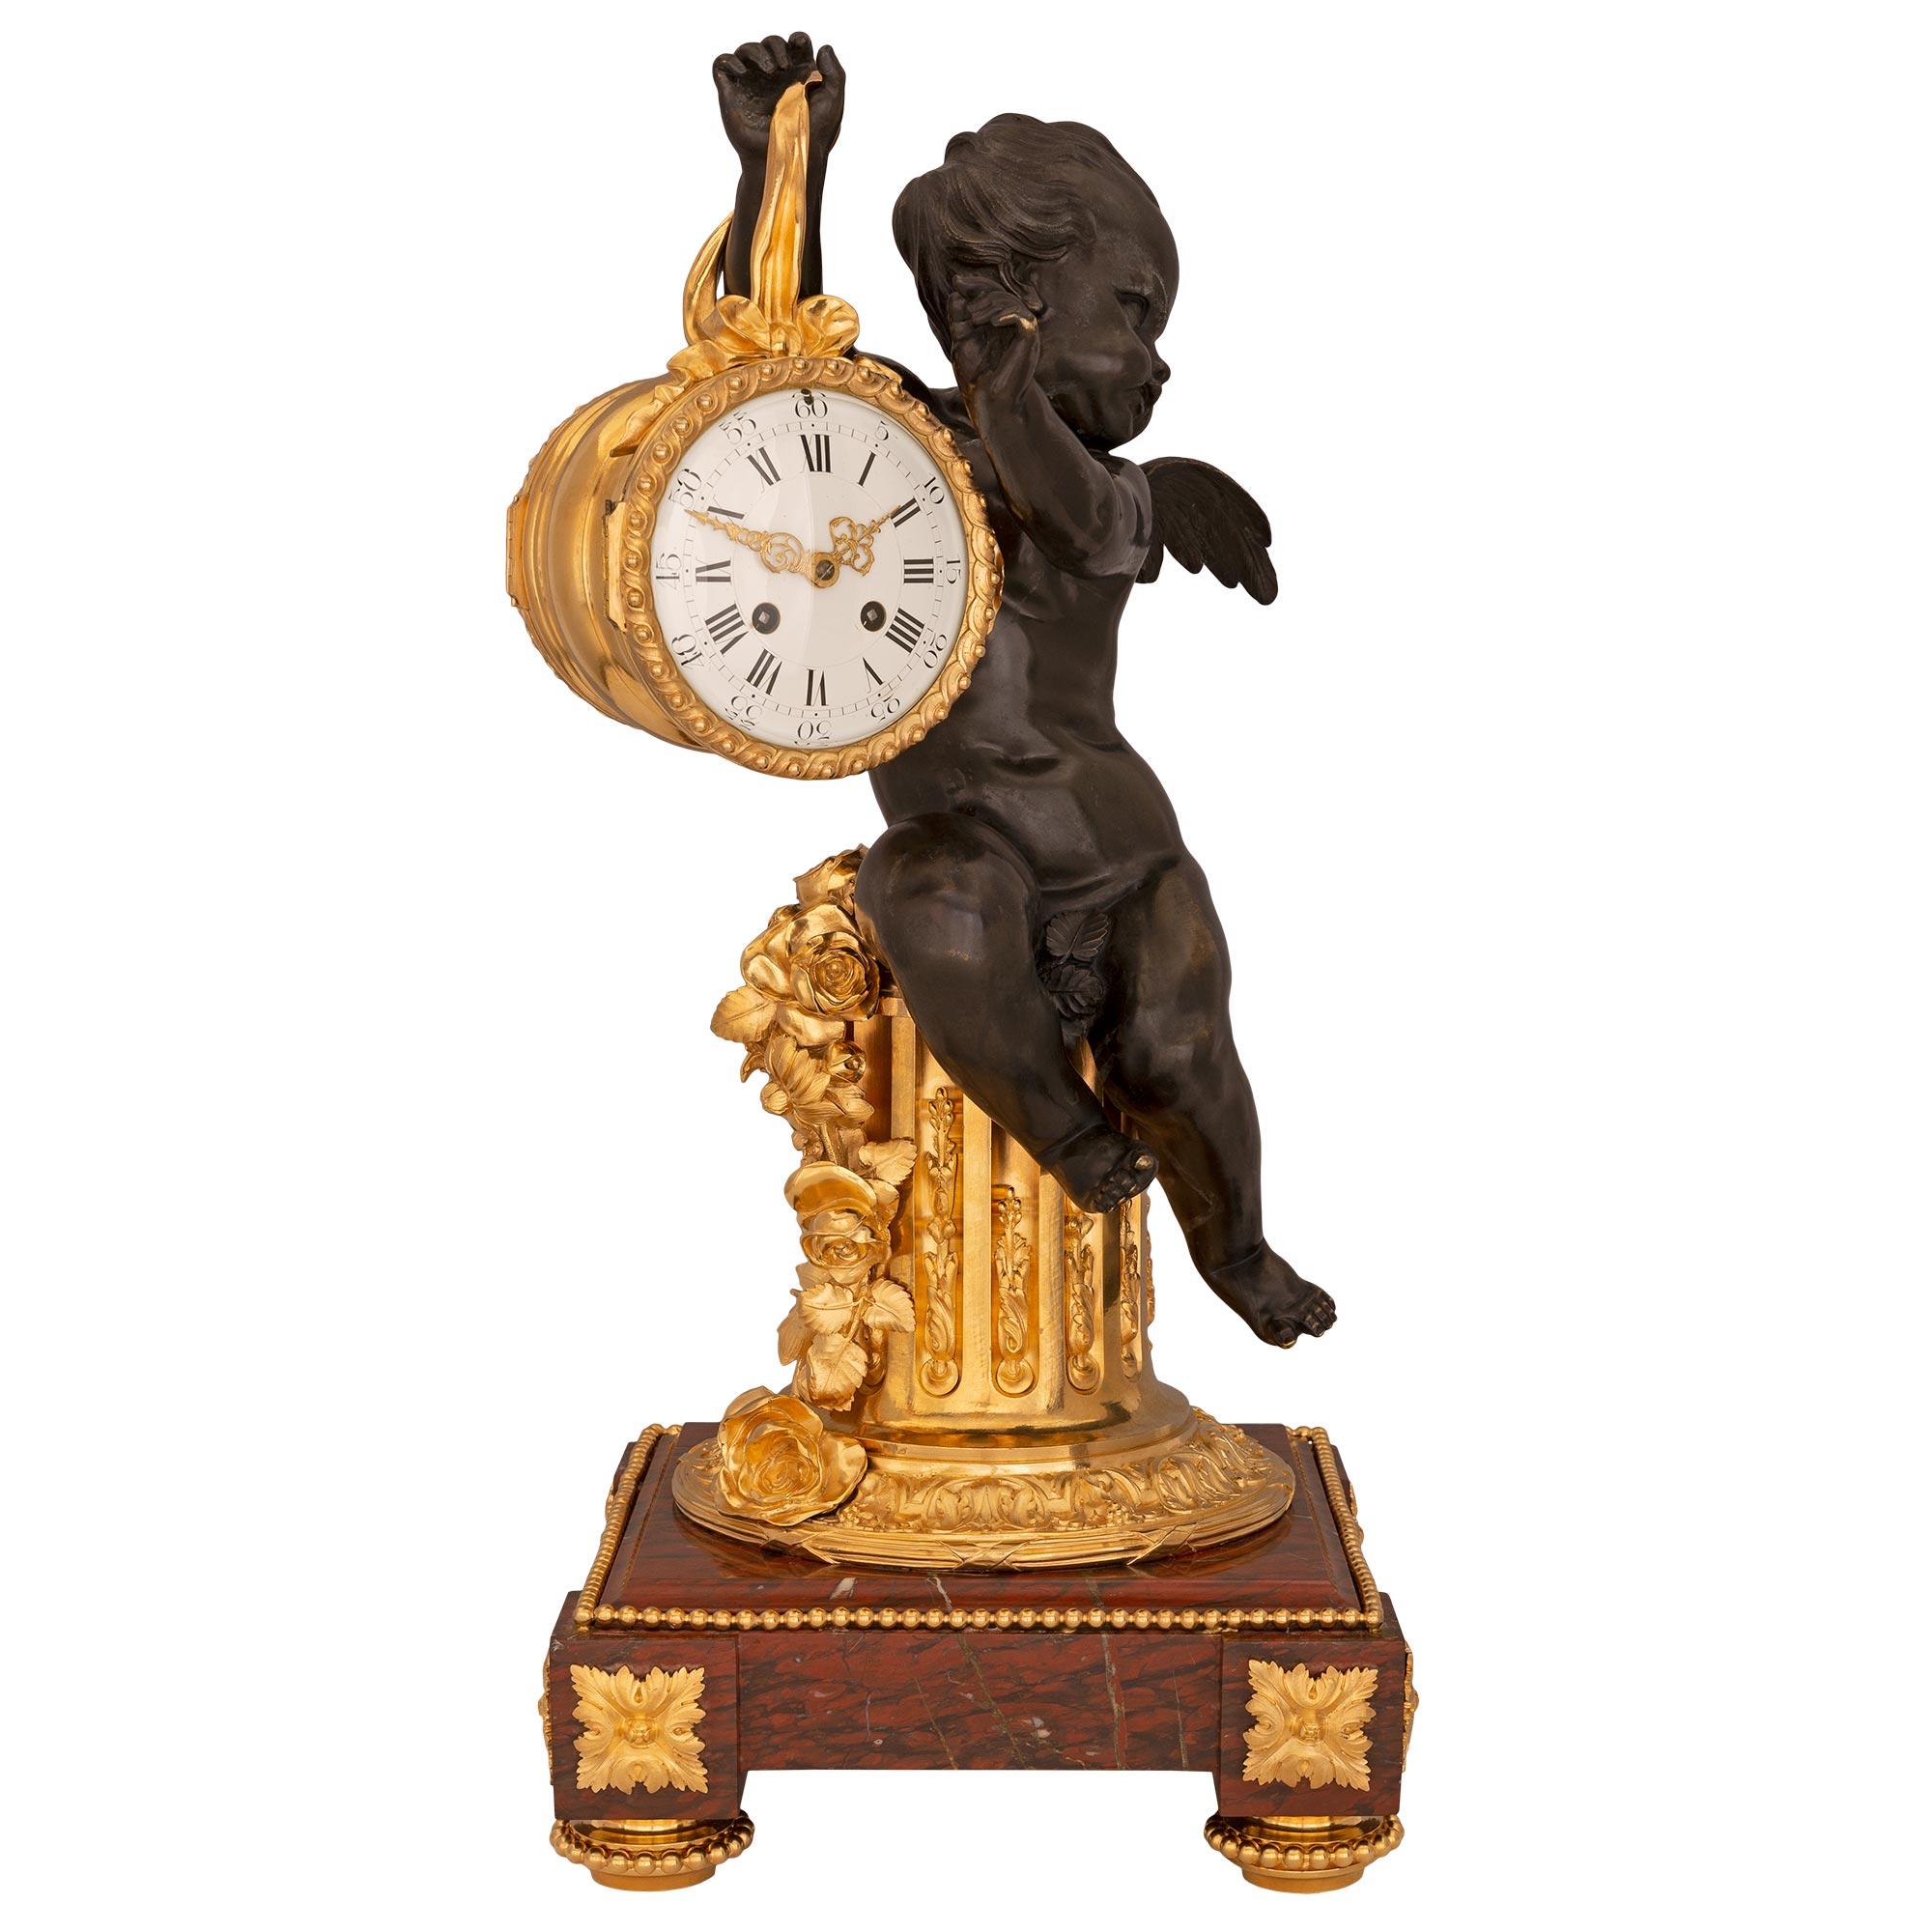 A stunning and extremely high quality French 19th century Louis XVI st. Belle Époque period patinated bronze, ormolu, and Rouge Griotte marble clock attributed to Henry Dasson. The clock is raised by a striking square Rouge Griotte marble base with